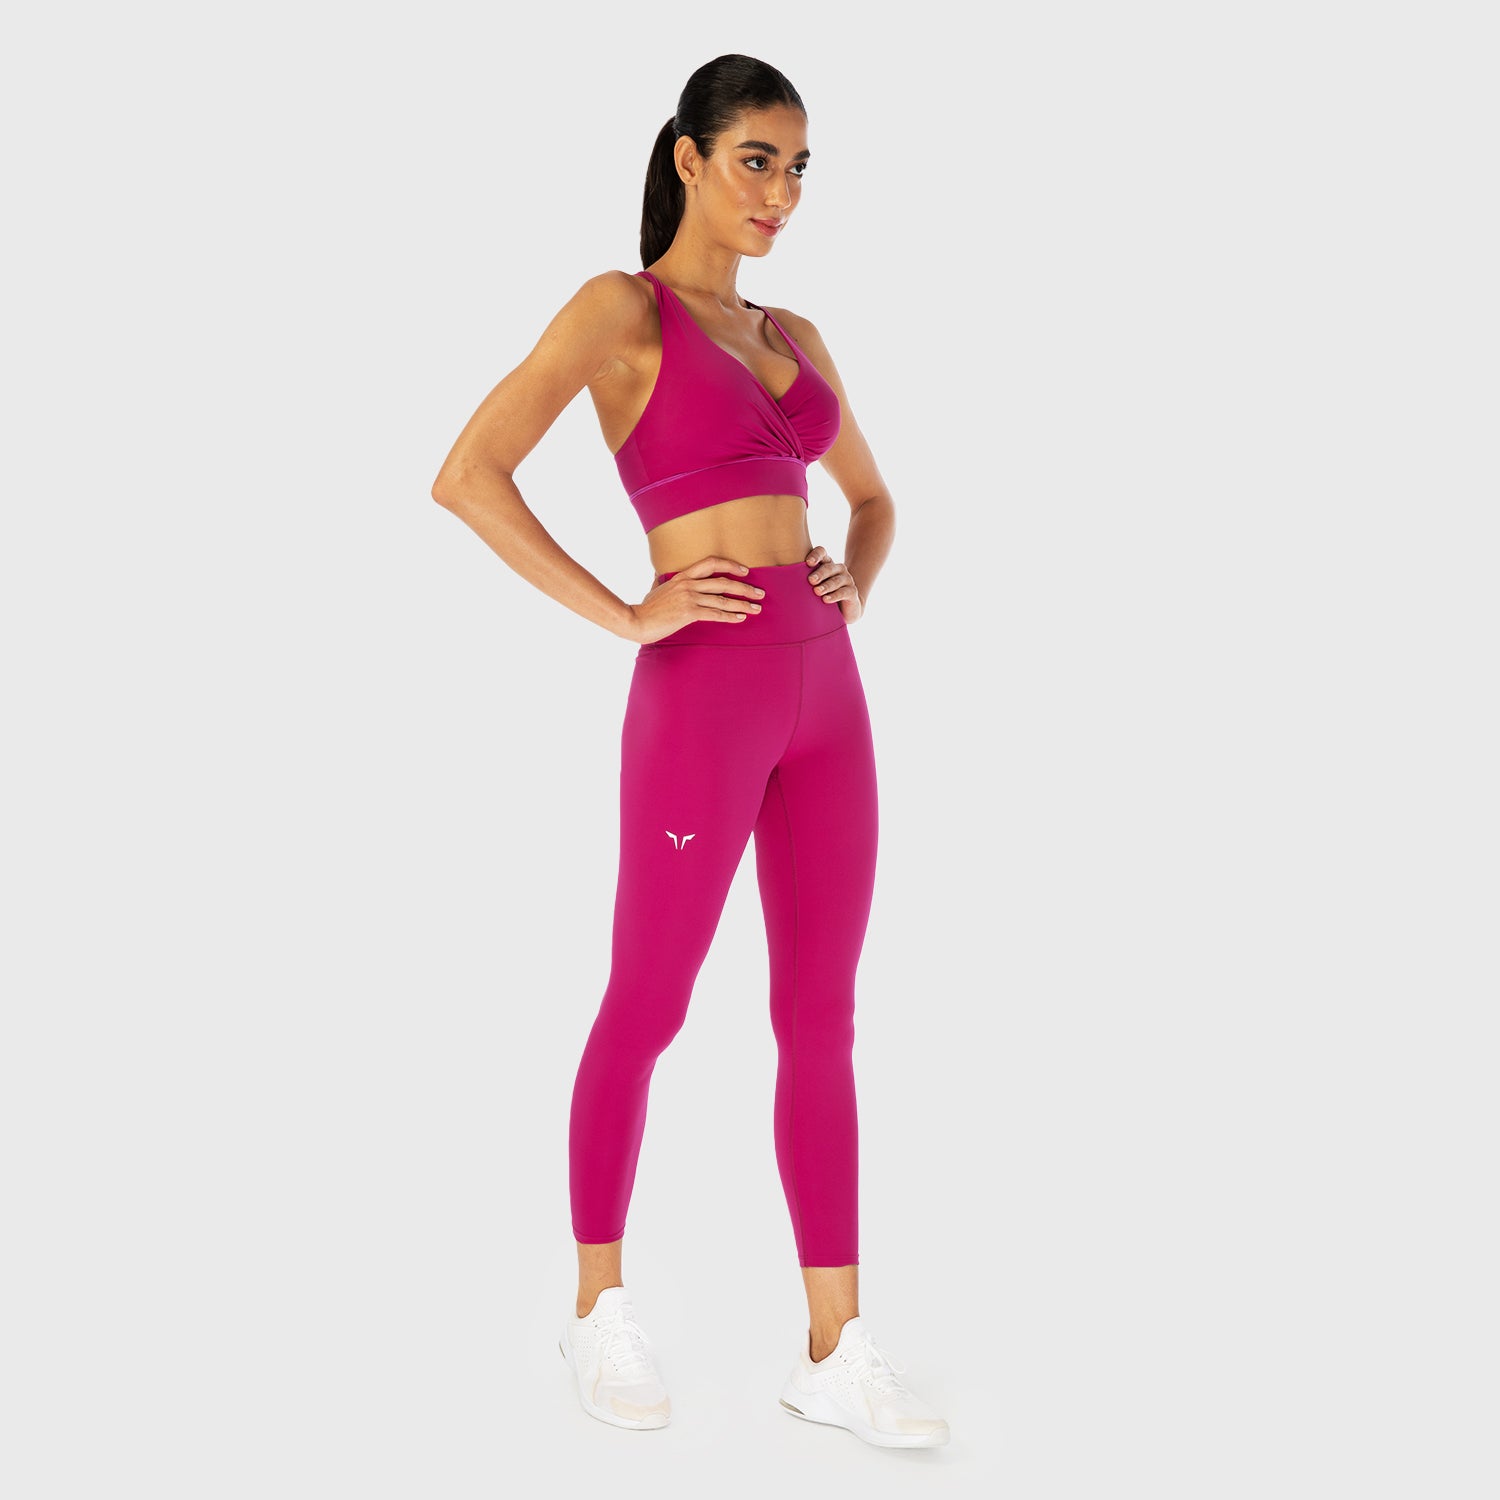 squatwolf-workout-clothes-infinity-cropped-7-8-leggings-festive-fuchsia-leggings-for-women